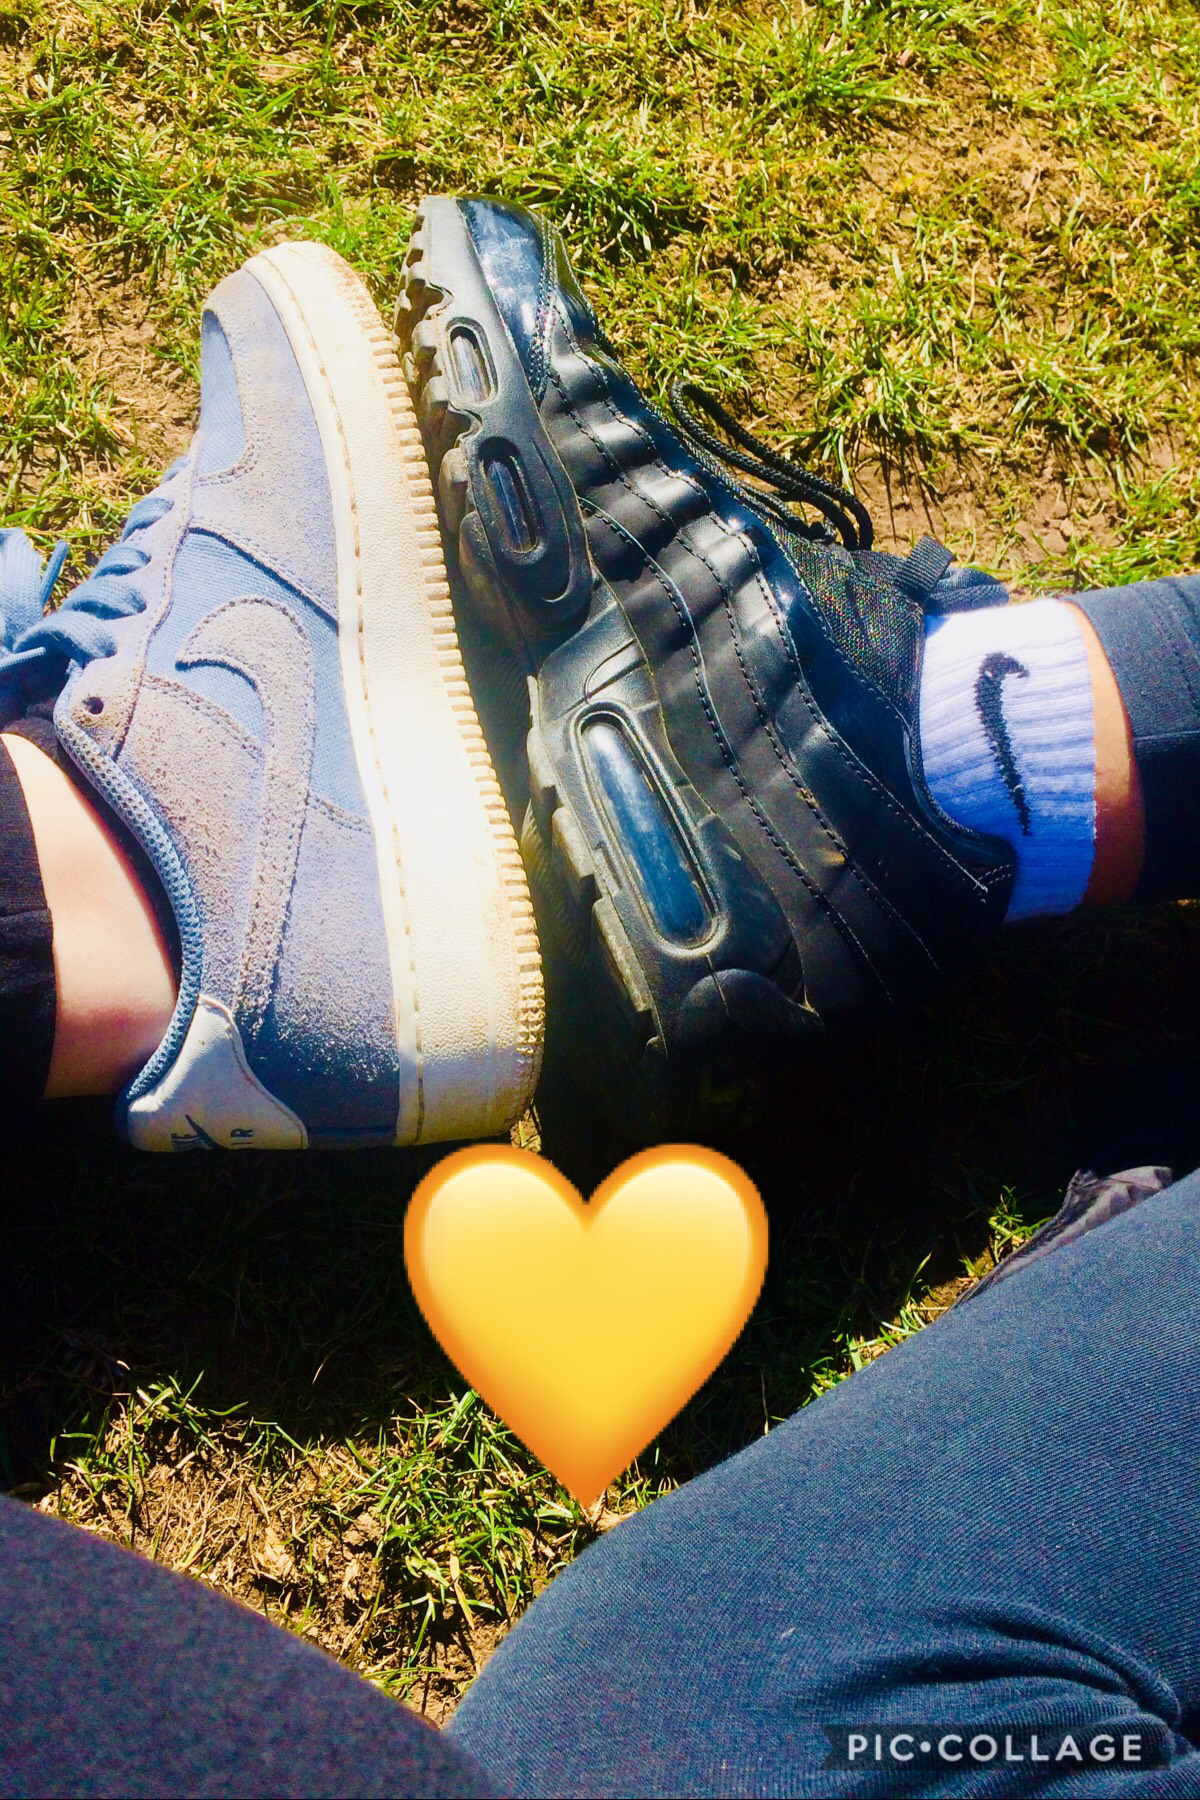 This is random but I like the pic of me and my friends shoes together, mine are the Air Force 1’s🤪